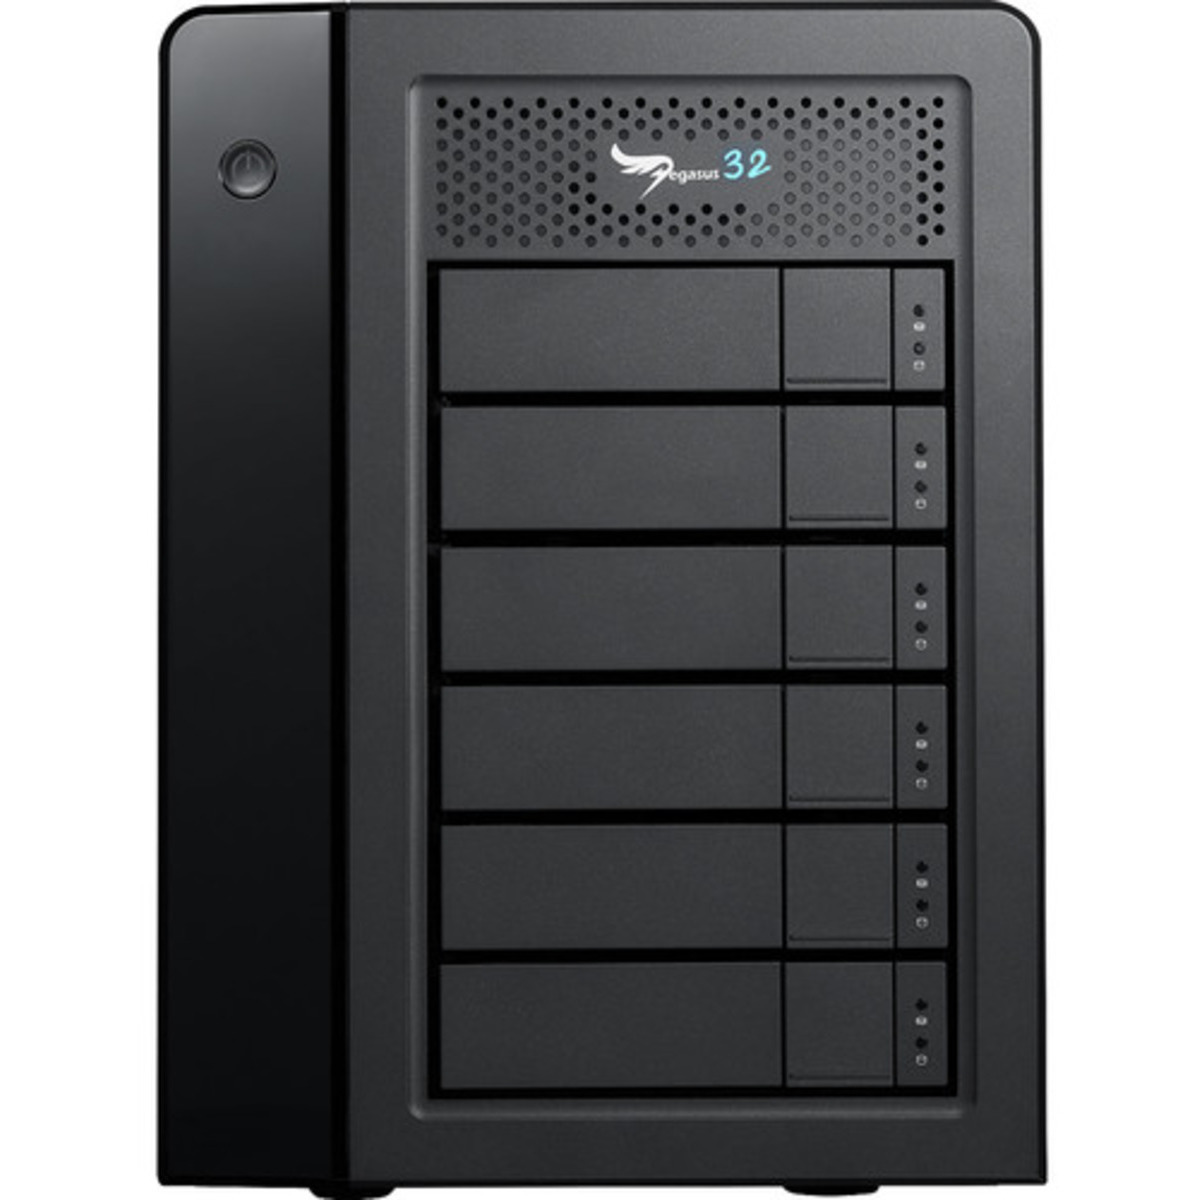 Promise Technology Pegasus32 R6 Thunderbolt 3 12tb 6-Bay Desktop Multimedia / Power User / Business DAS - Direct Attached Storage Device 6x2tb Western Digital Red SA500 WDS200T1R0A 2.5 560/530MB/s SATA 6Gb/s SSD NAS Class Drives Installed - Burn-In Tested Pegasus32 R6 Thunderbolt 3